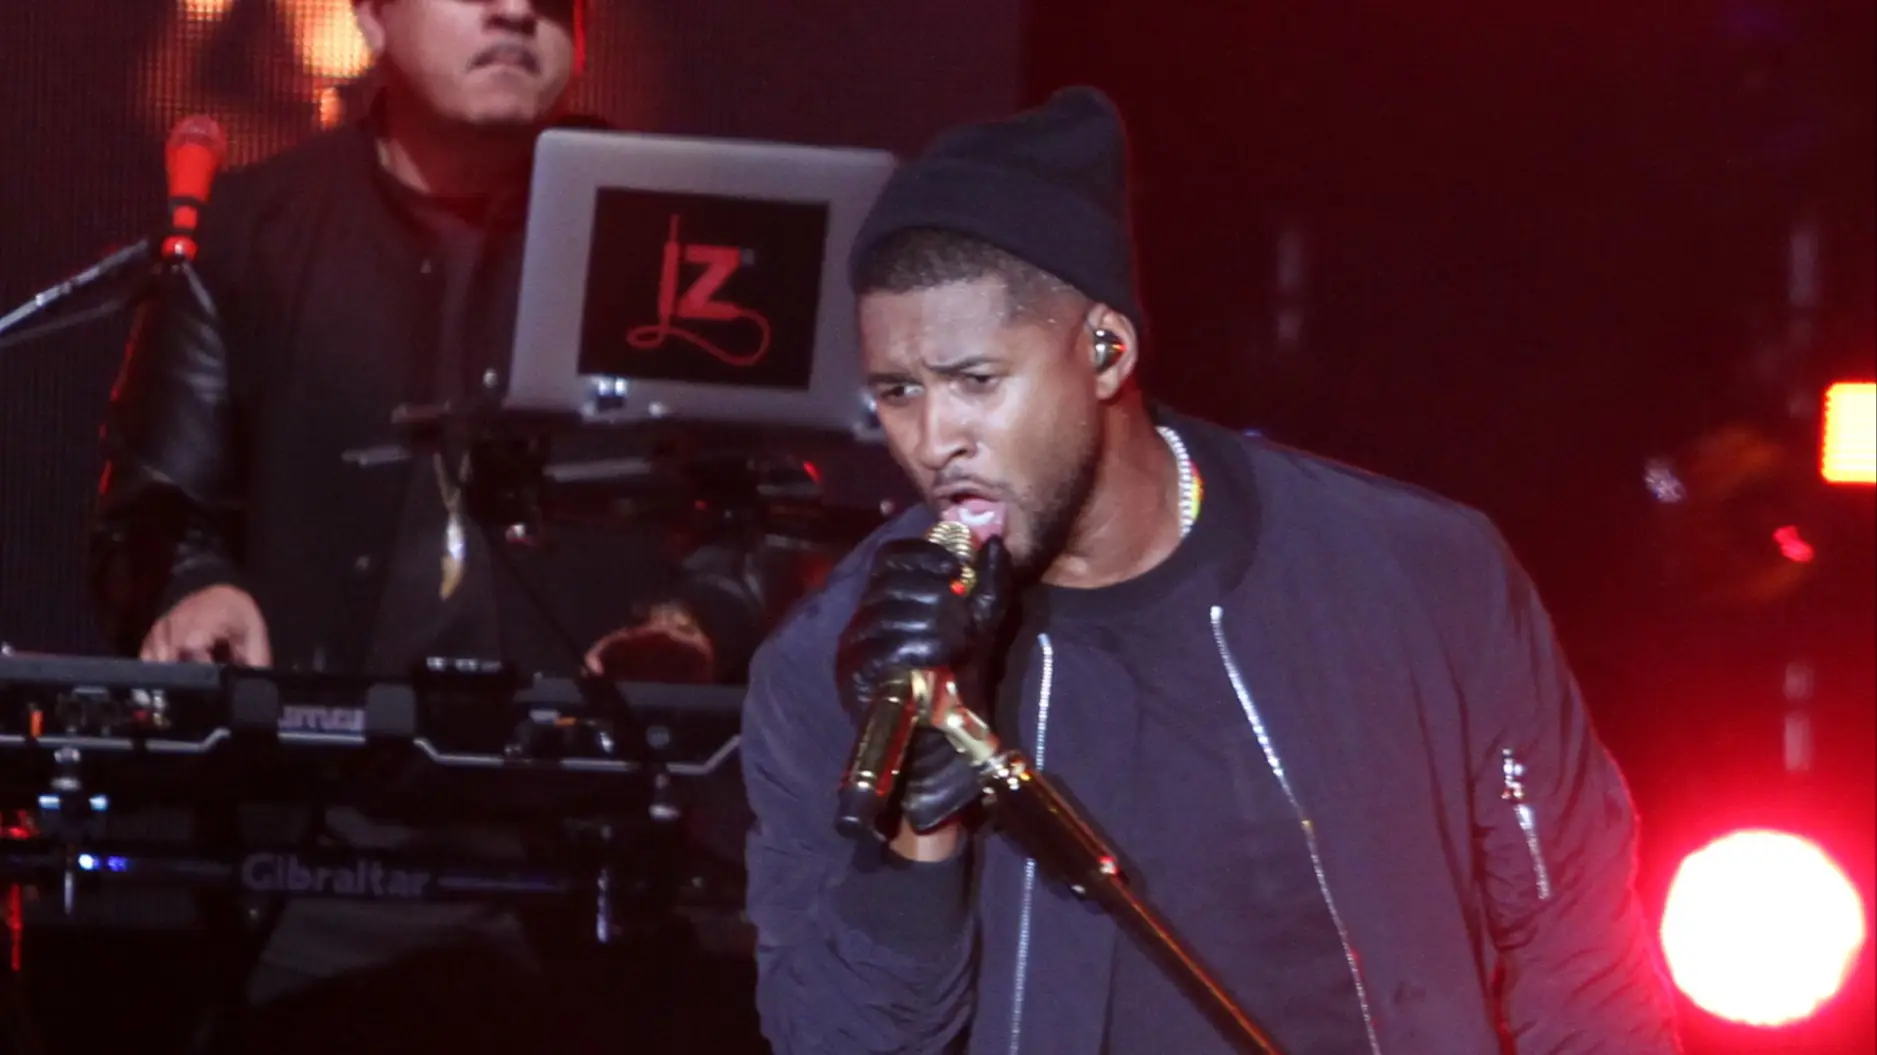 Usher performing in New Olreans, Louisiana for the Allstate Sugar Bowl Fan Fest, December 2015 by Tammy Anthony Baker (CC BY 2.0 DEED)